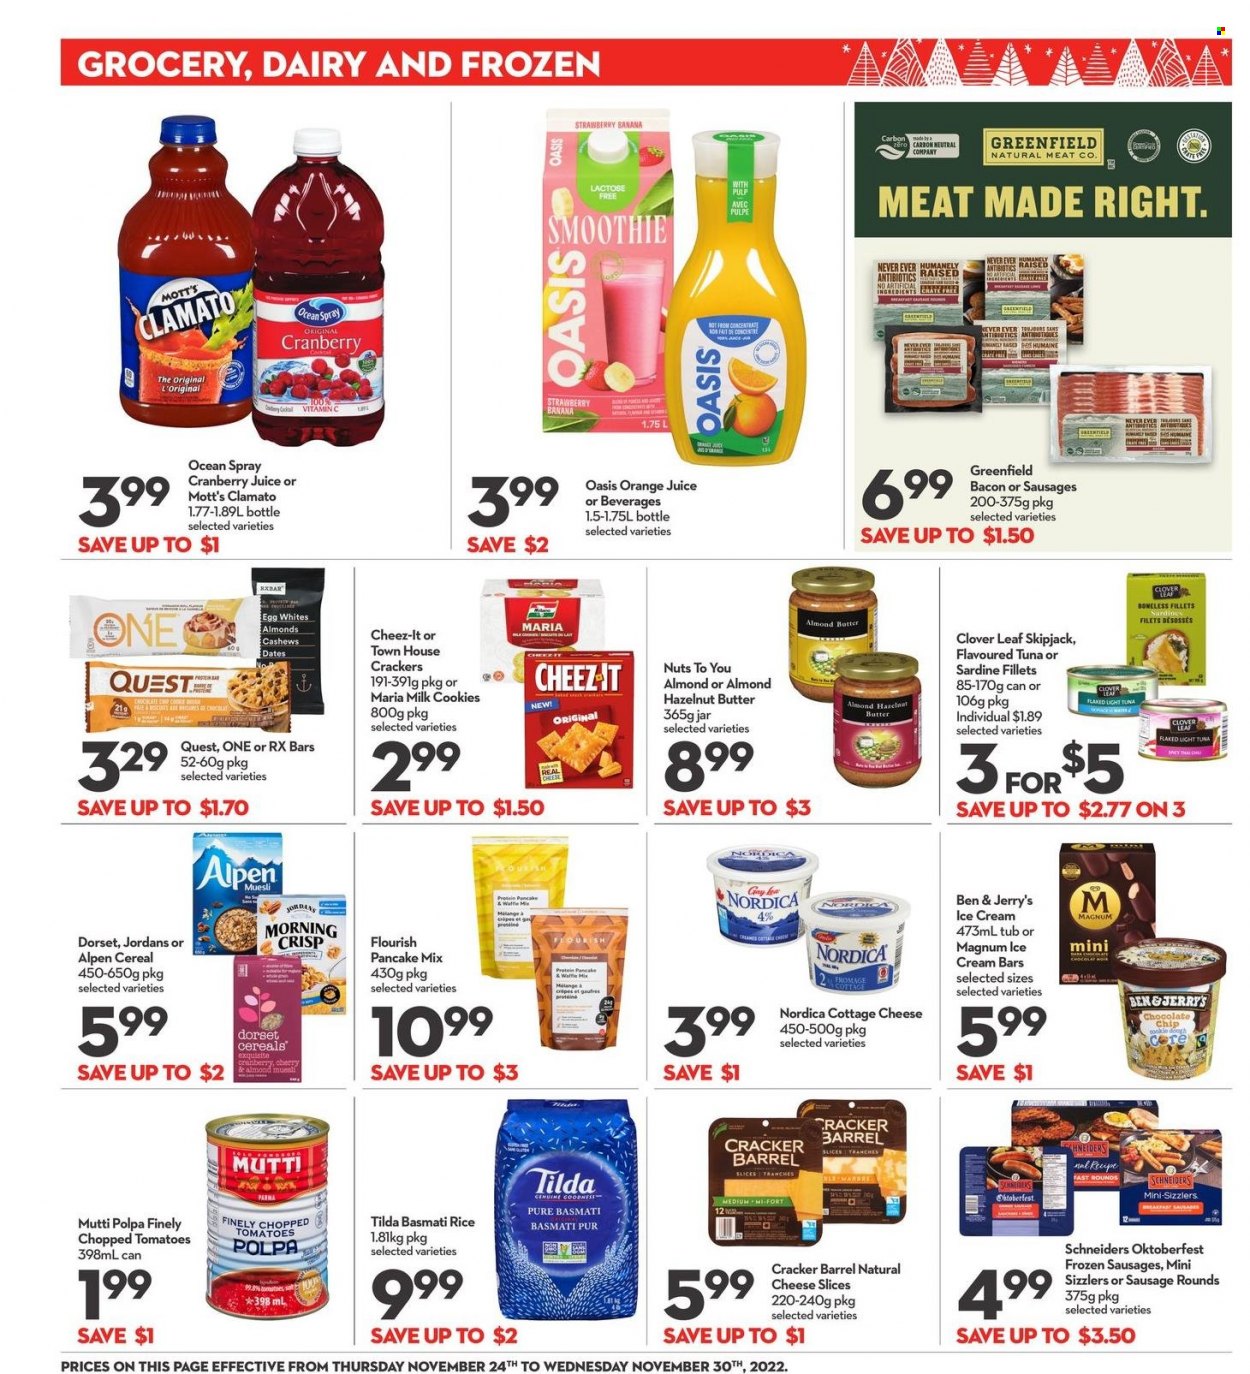 thumbnail - Longo's Flyer - November 24, 2022 - November 30, 2022 - Sales products - Ace, tomatoes, cherries, Mott's, tuna, pancakes, bacon, sausage, cottage cheese, sliced cheese, cheese, Clover, milk, eggs, almond butter, Magnum, ice cream bars, Ben & Jerry's, cookies, crackers, biscuit, Cheez-It, light tuna, chopped tomatoes, cereals, protein bar, muesli, basmati rice, rice, almonds, cashews, cranberry juice, orange juice, juice, Clamato, smoothie, vitamin c. Page 12.